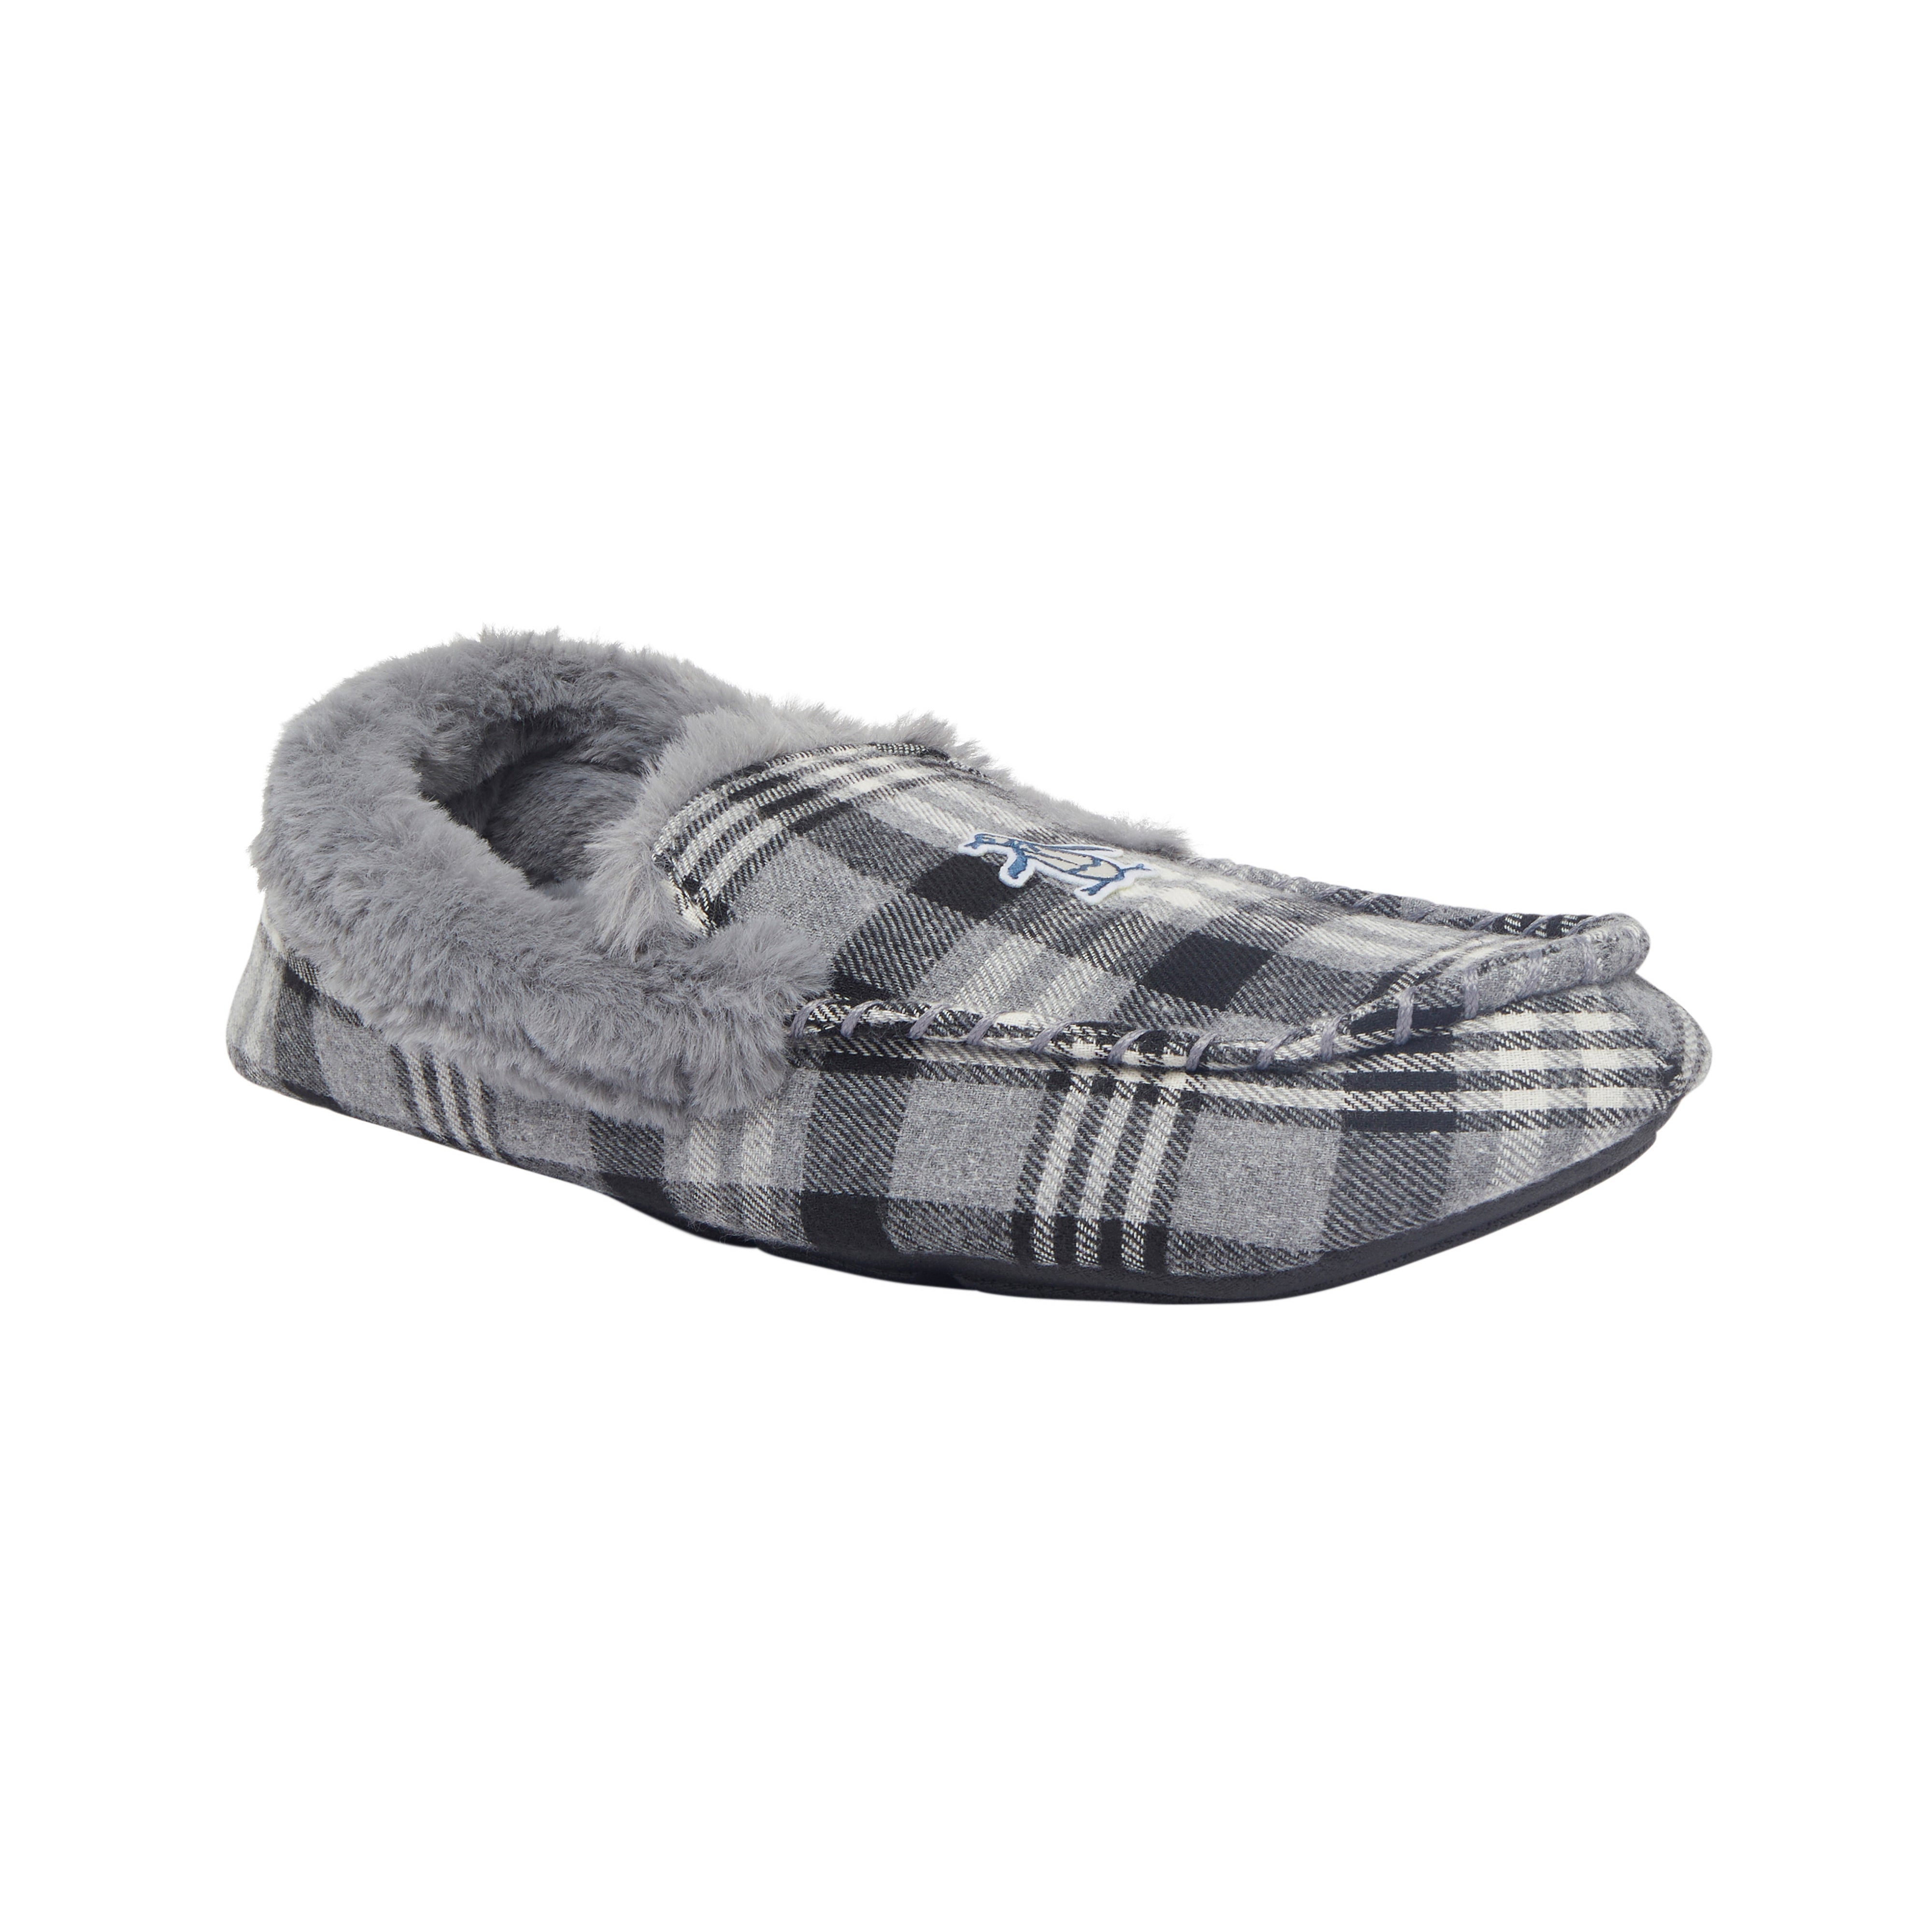 View Bedtime Checks Slipper In Charcoal Gray information